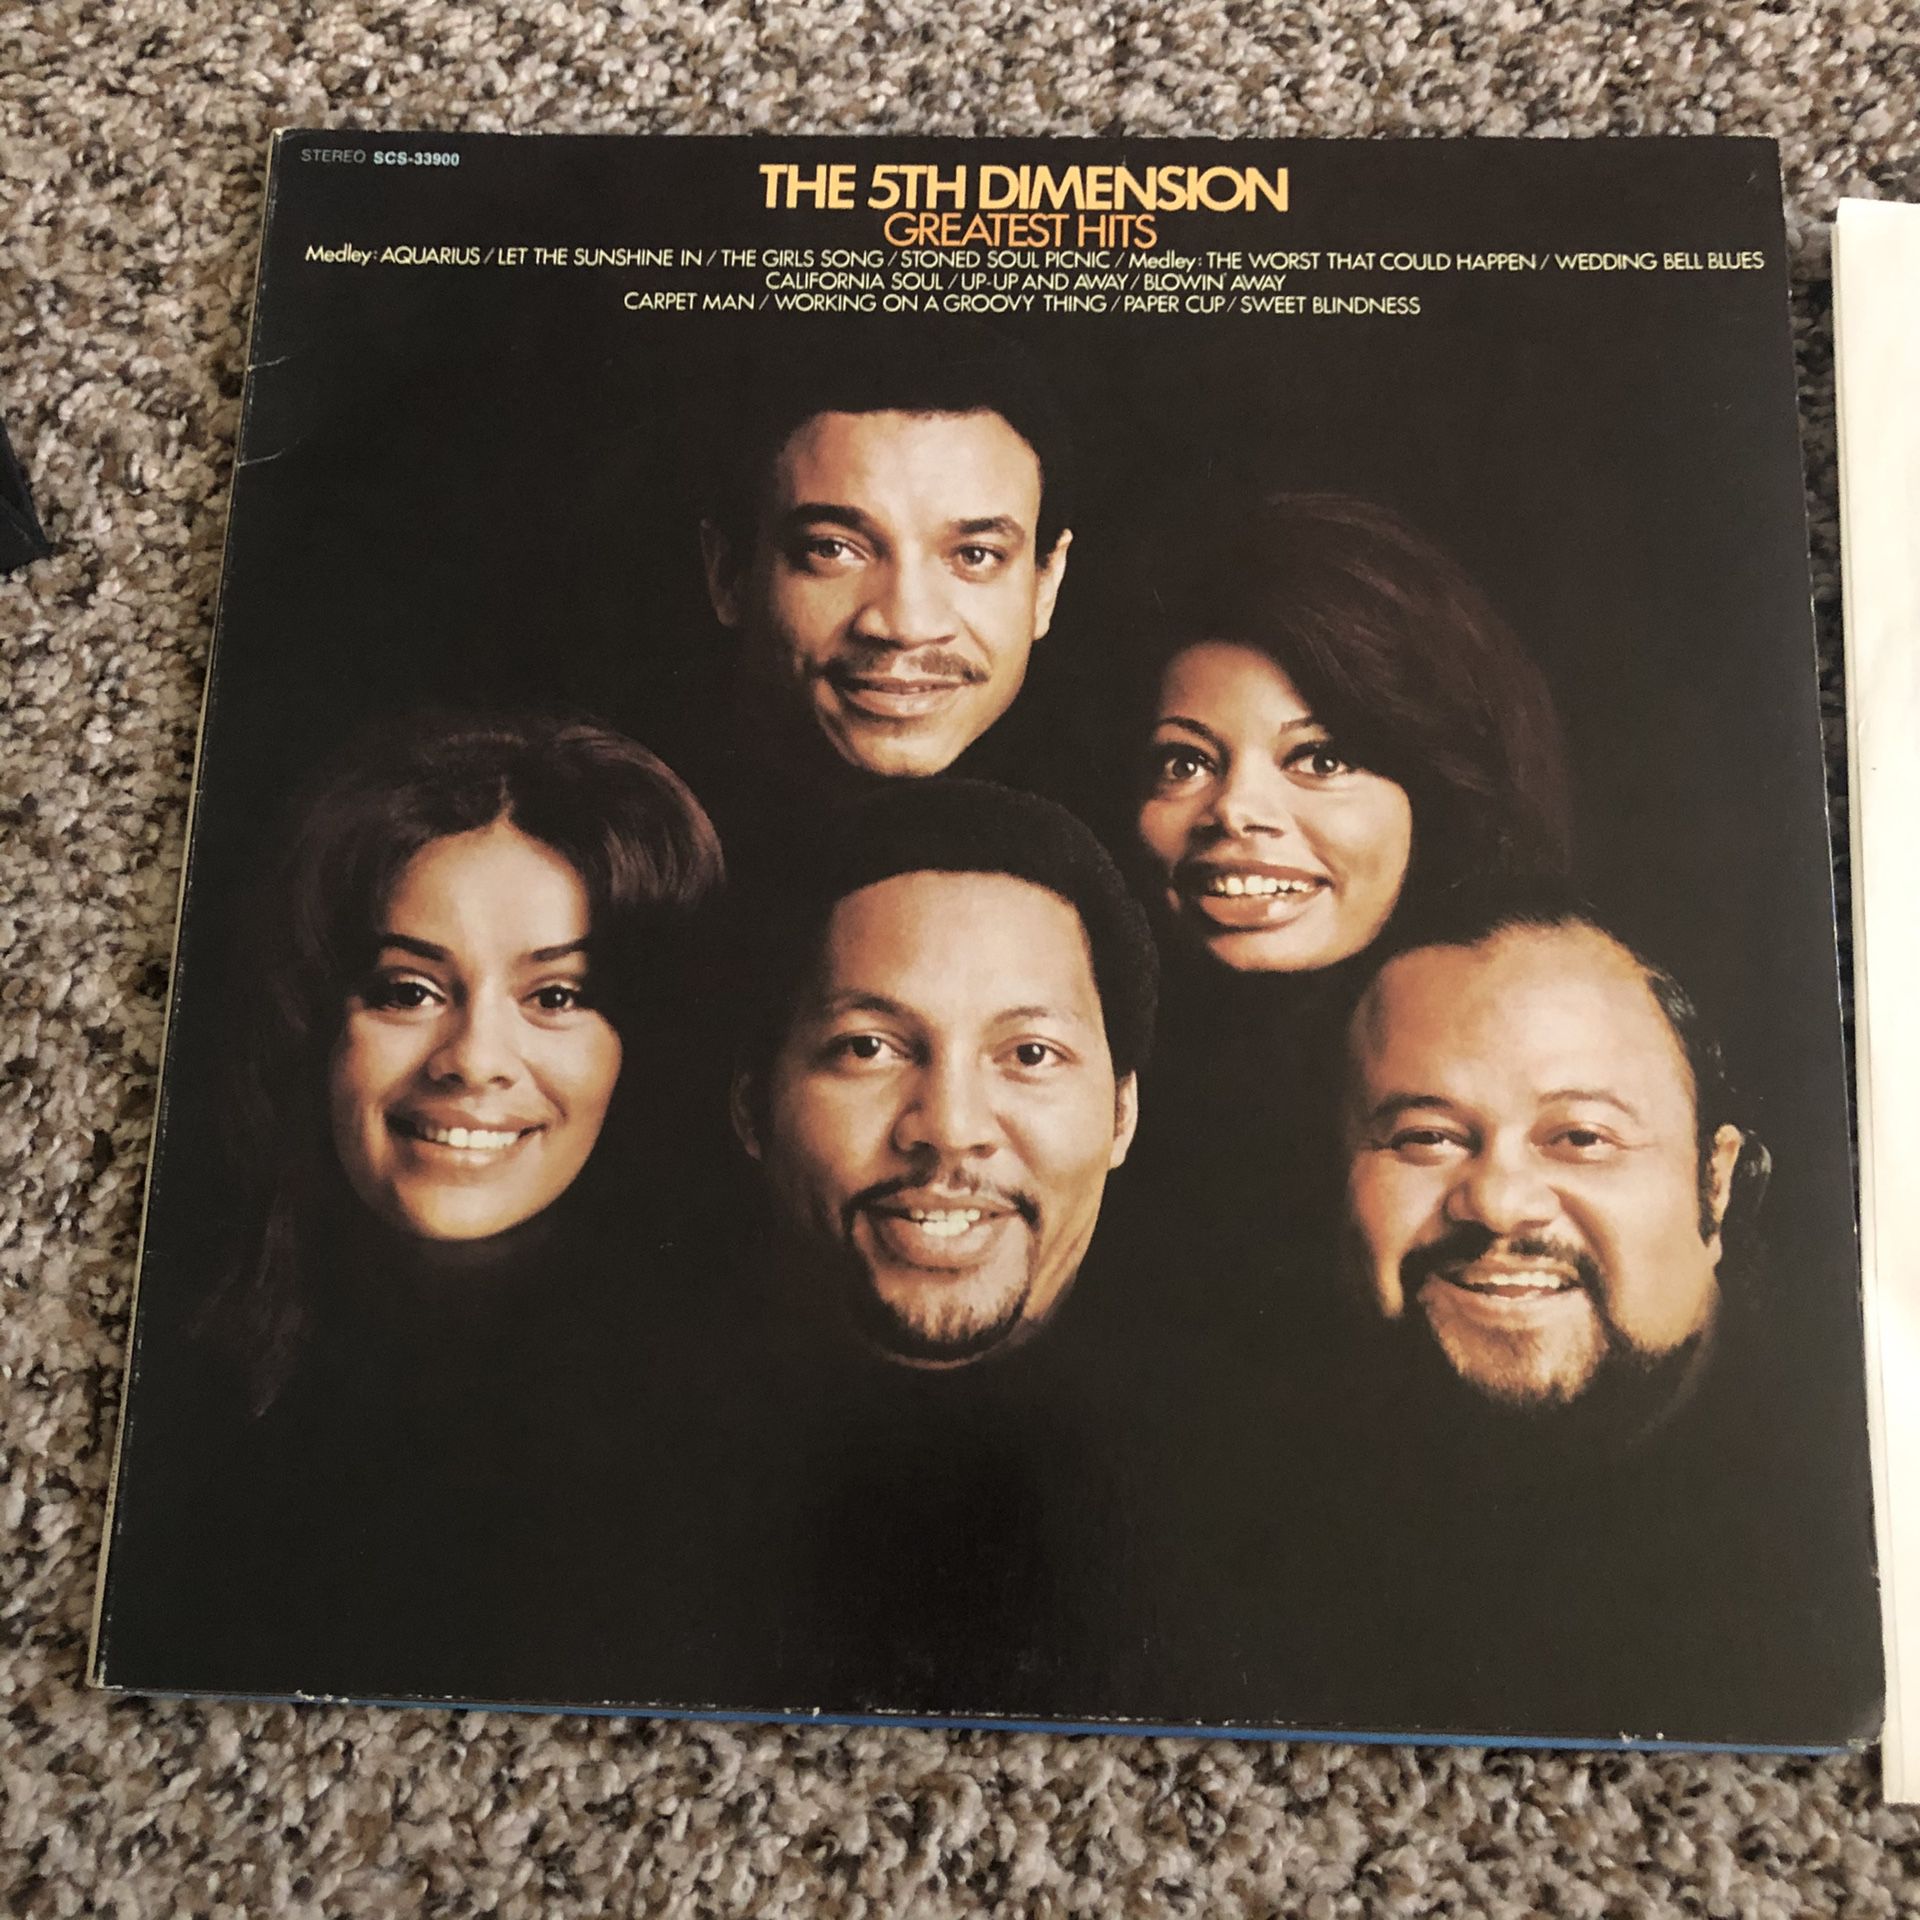 The 5 th dimension greatest hits no scratches ! 1970 vinyl album